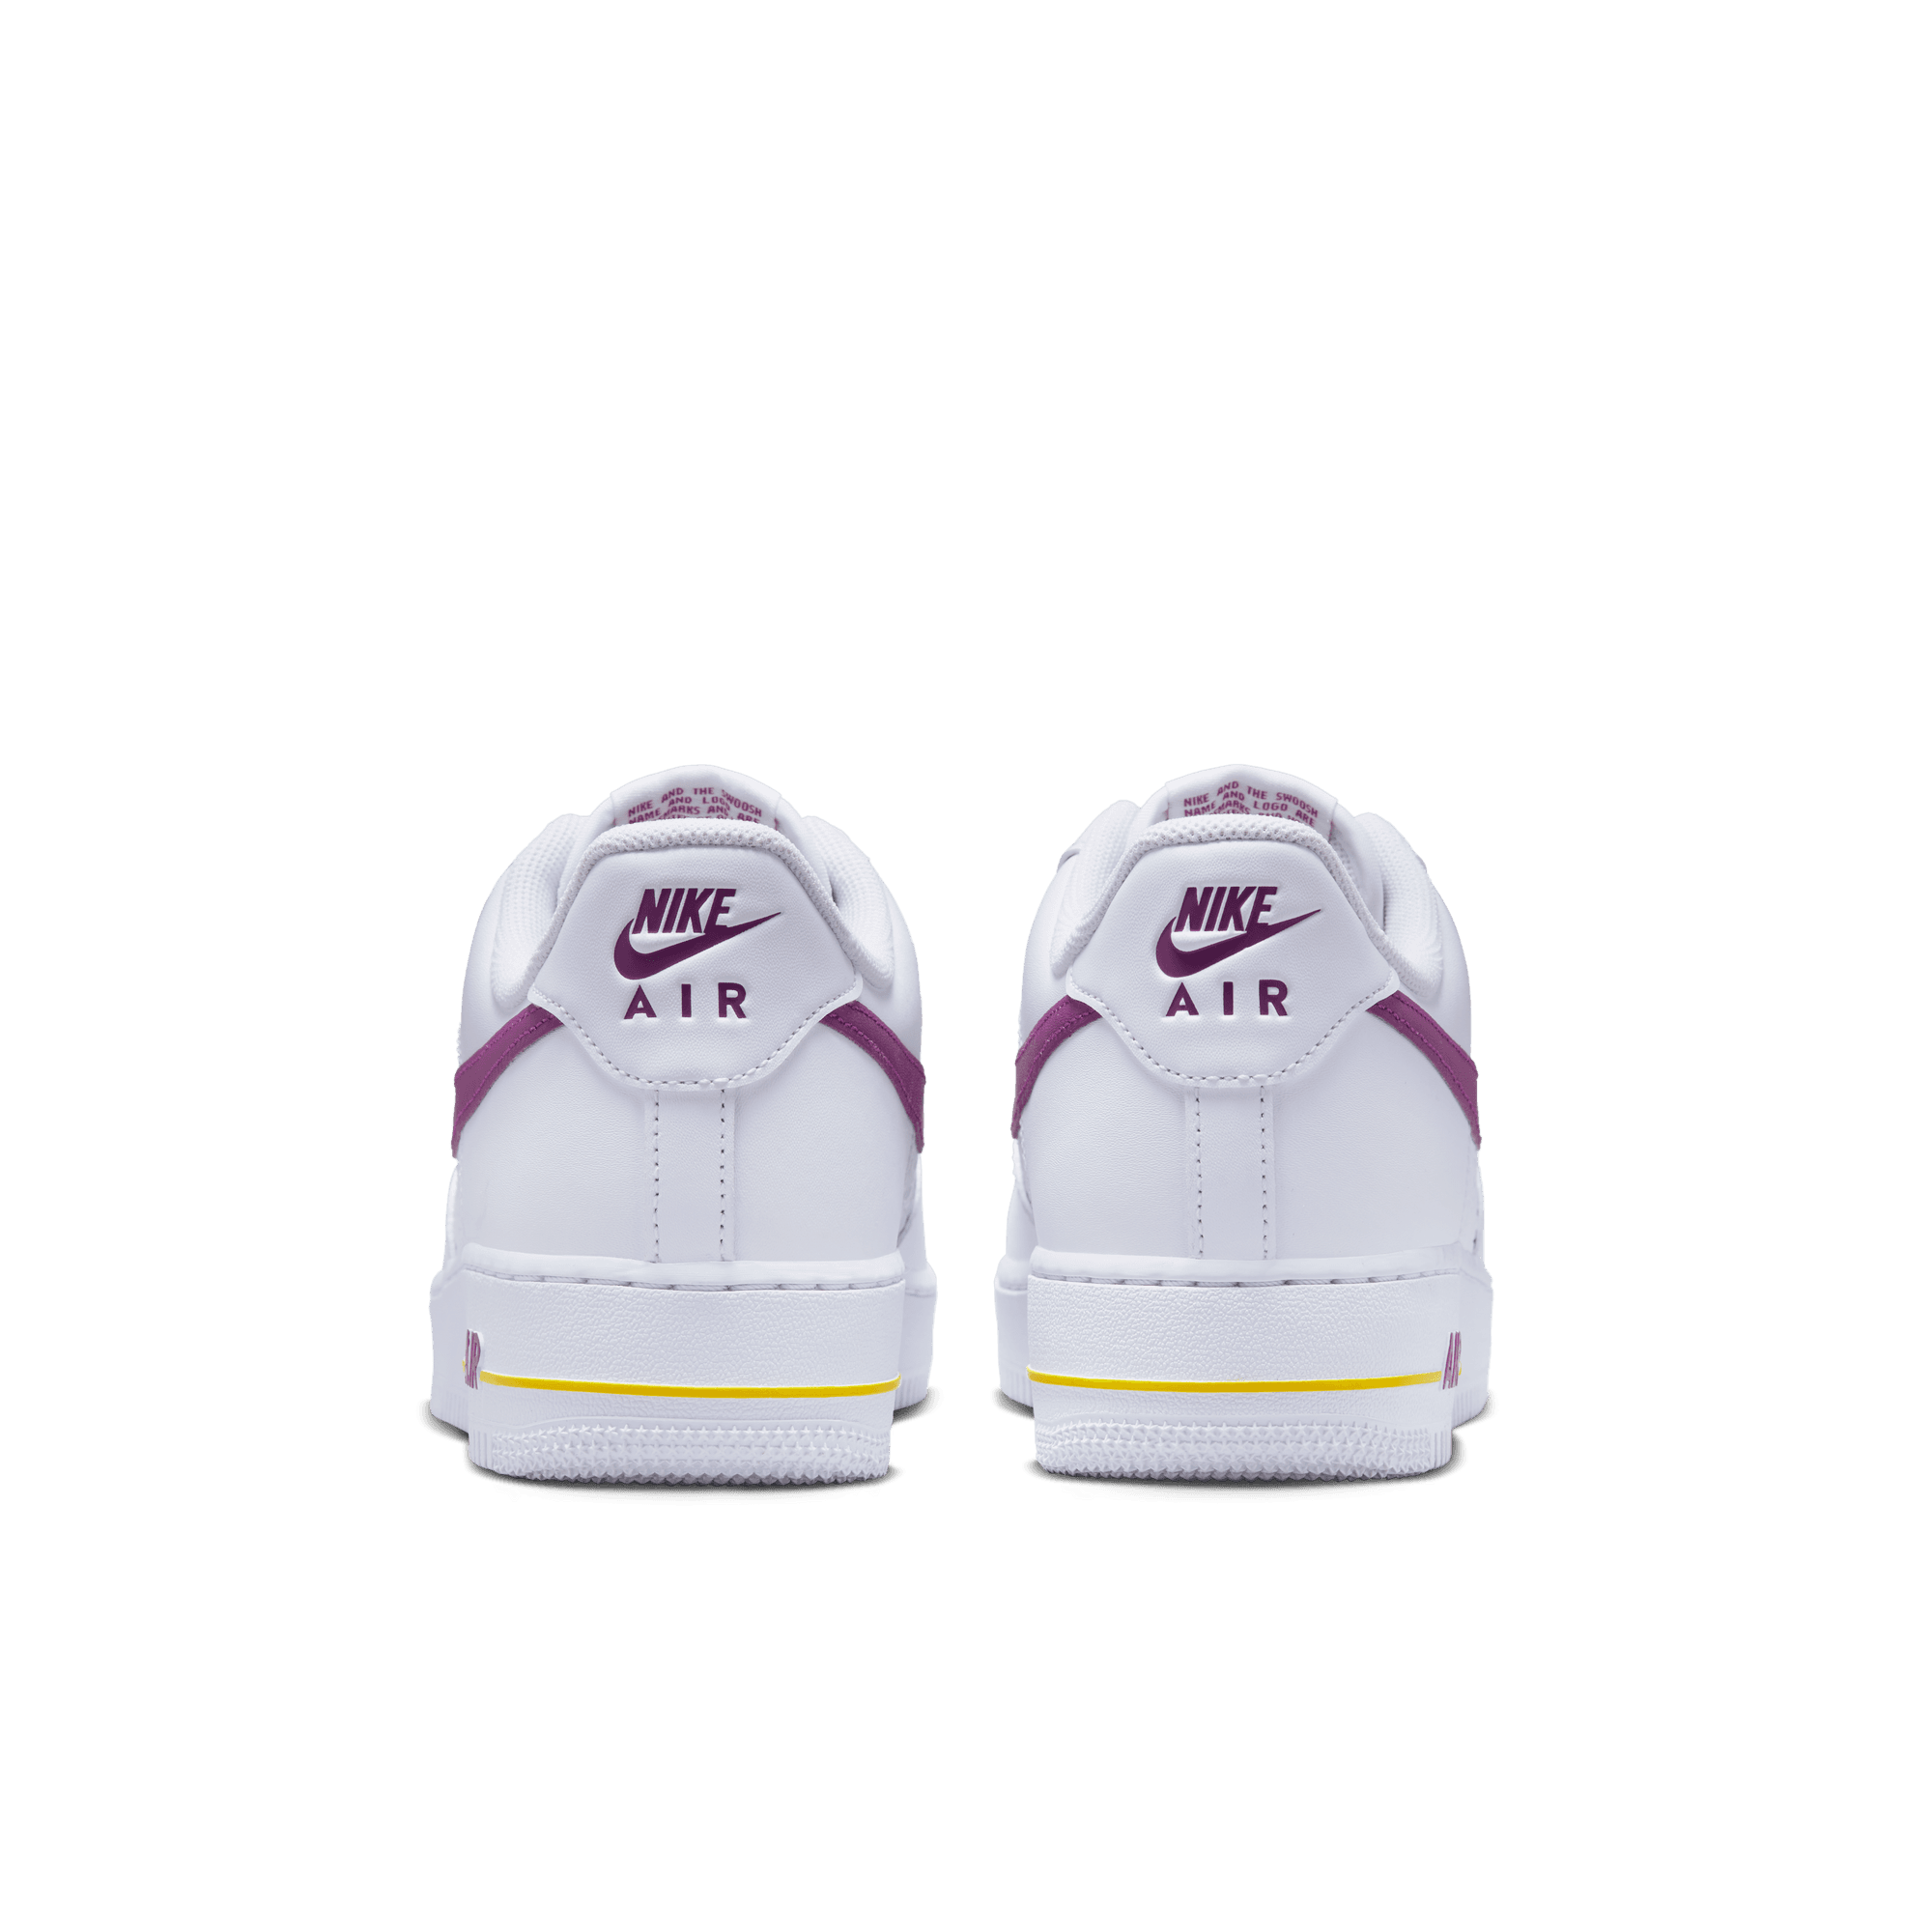 Check Out the Nike Air Force 1 EMB Bold Berry Here